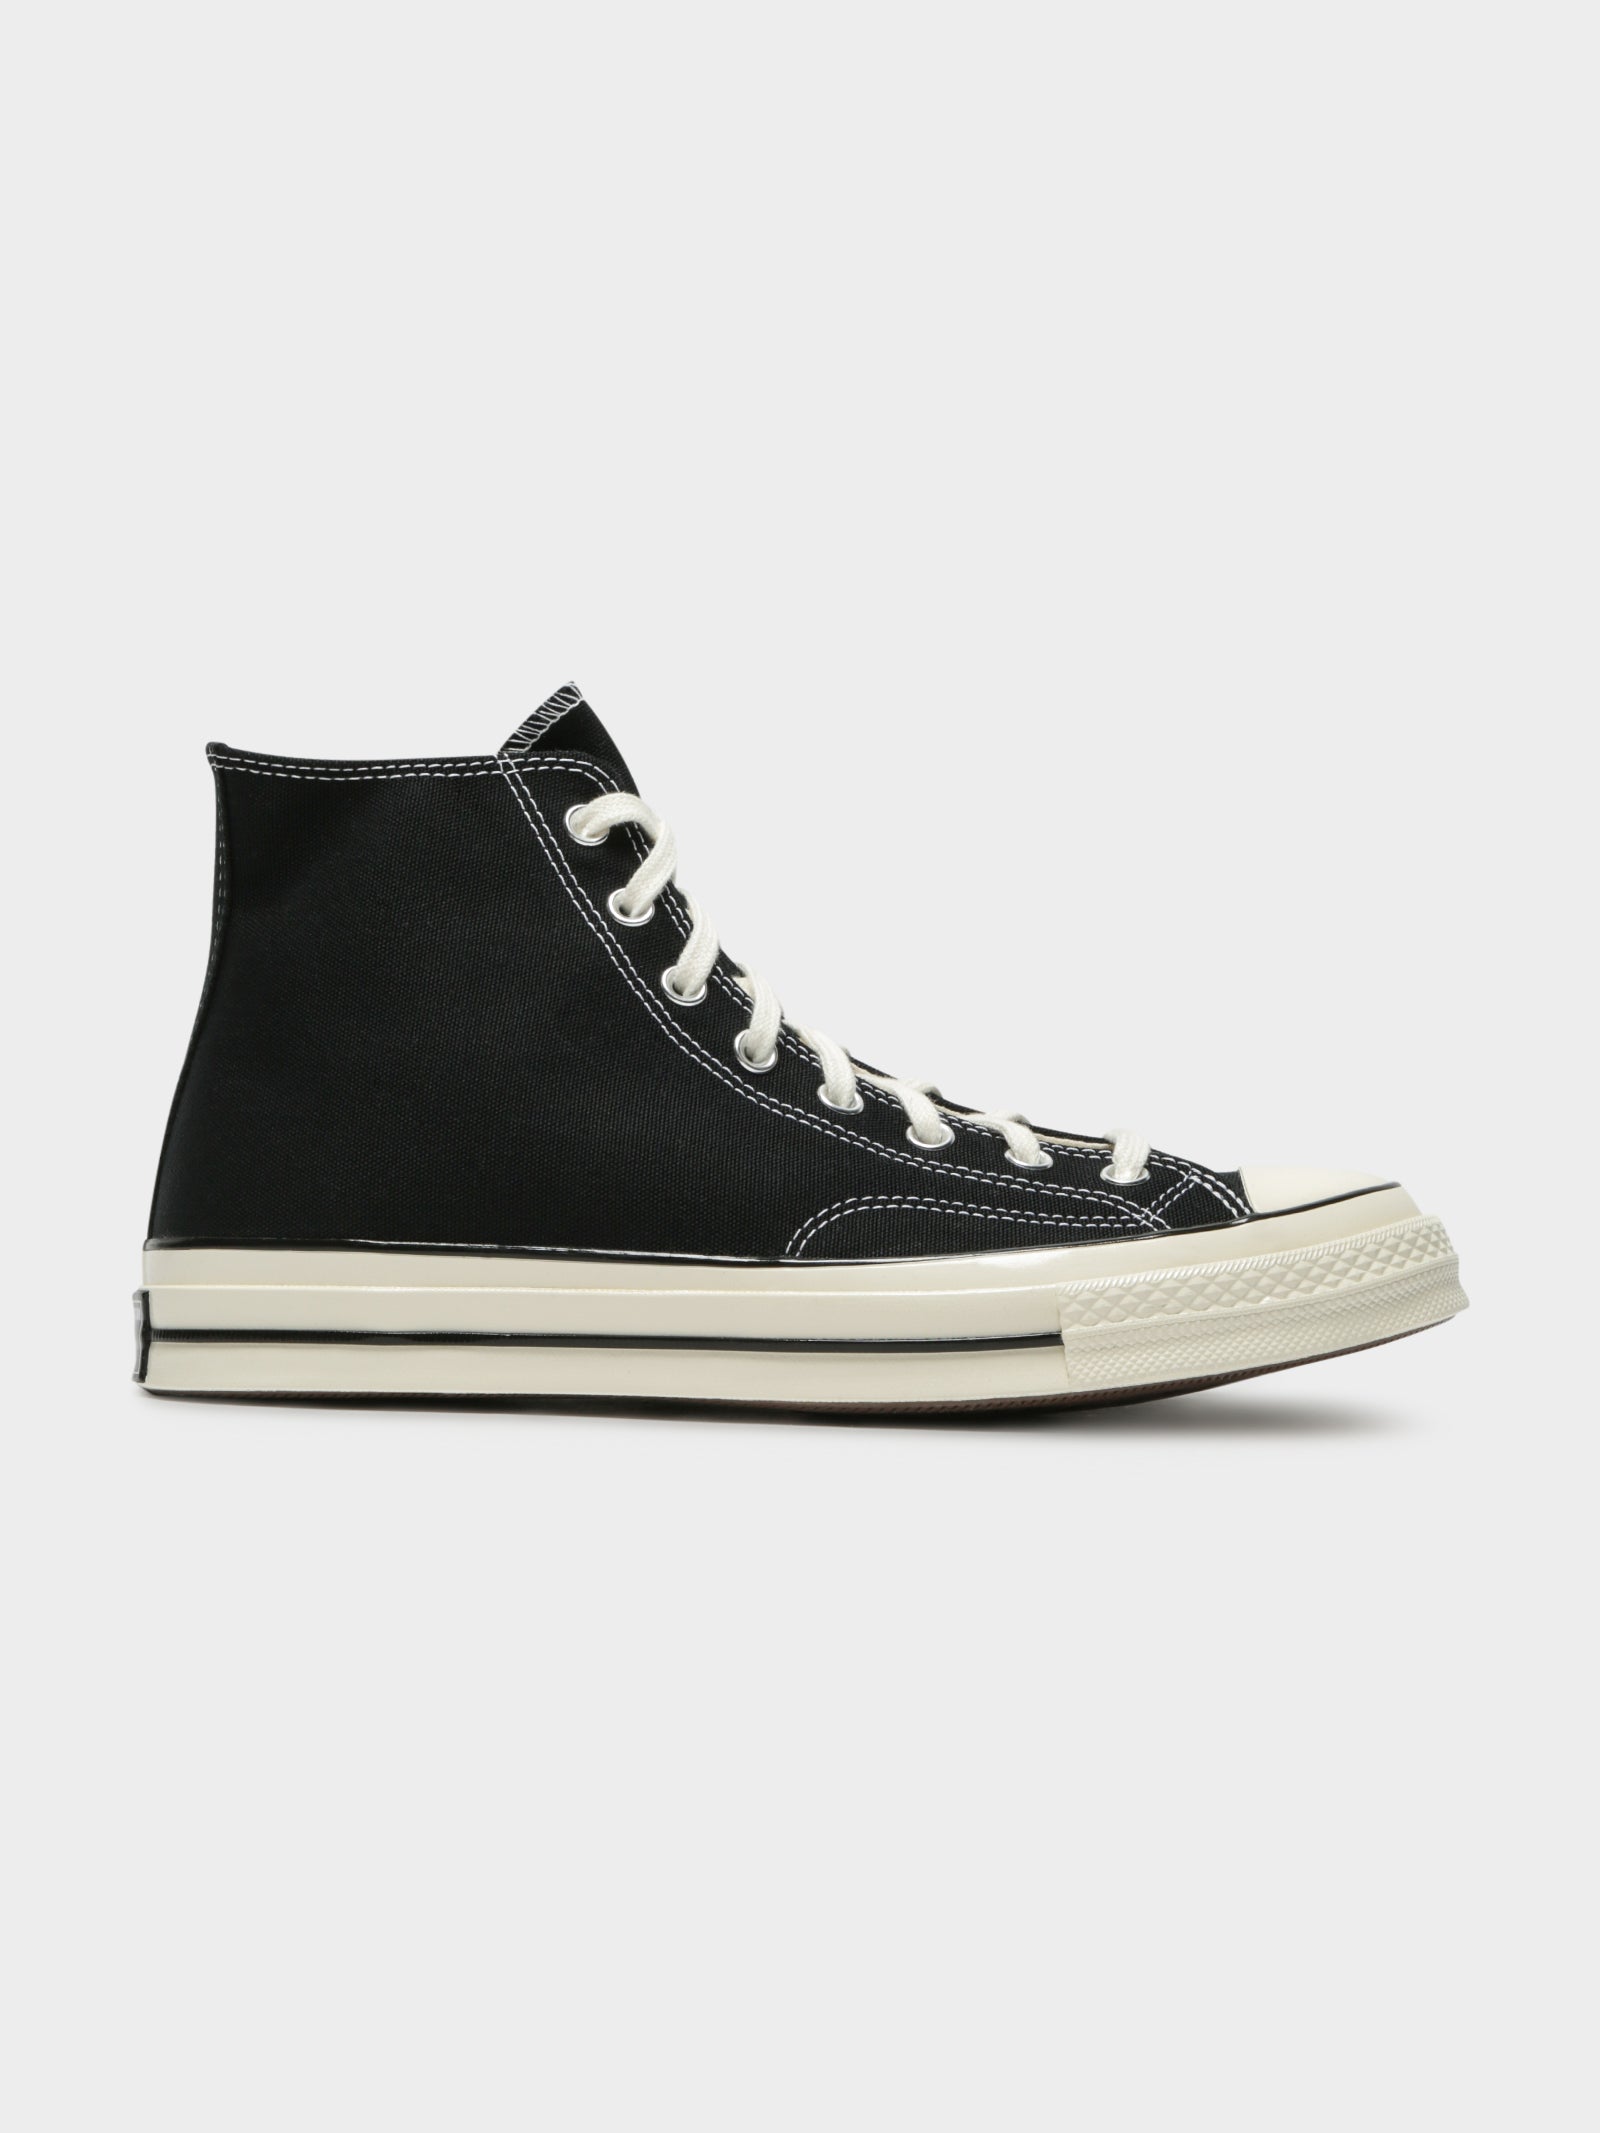 Chuck Taylor All Star 70 High Top Sneakers in Black - Glue Store NZ